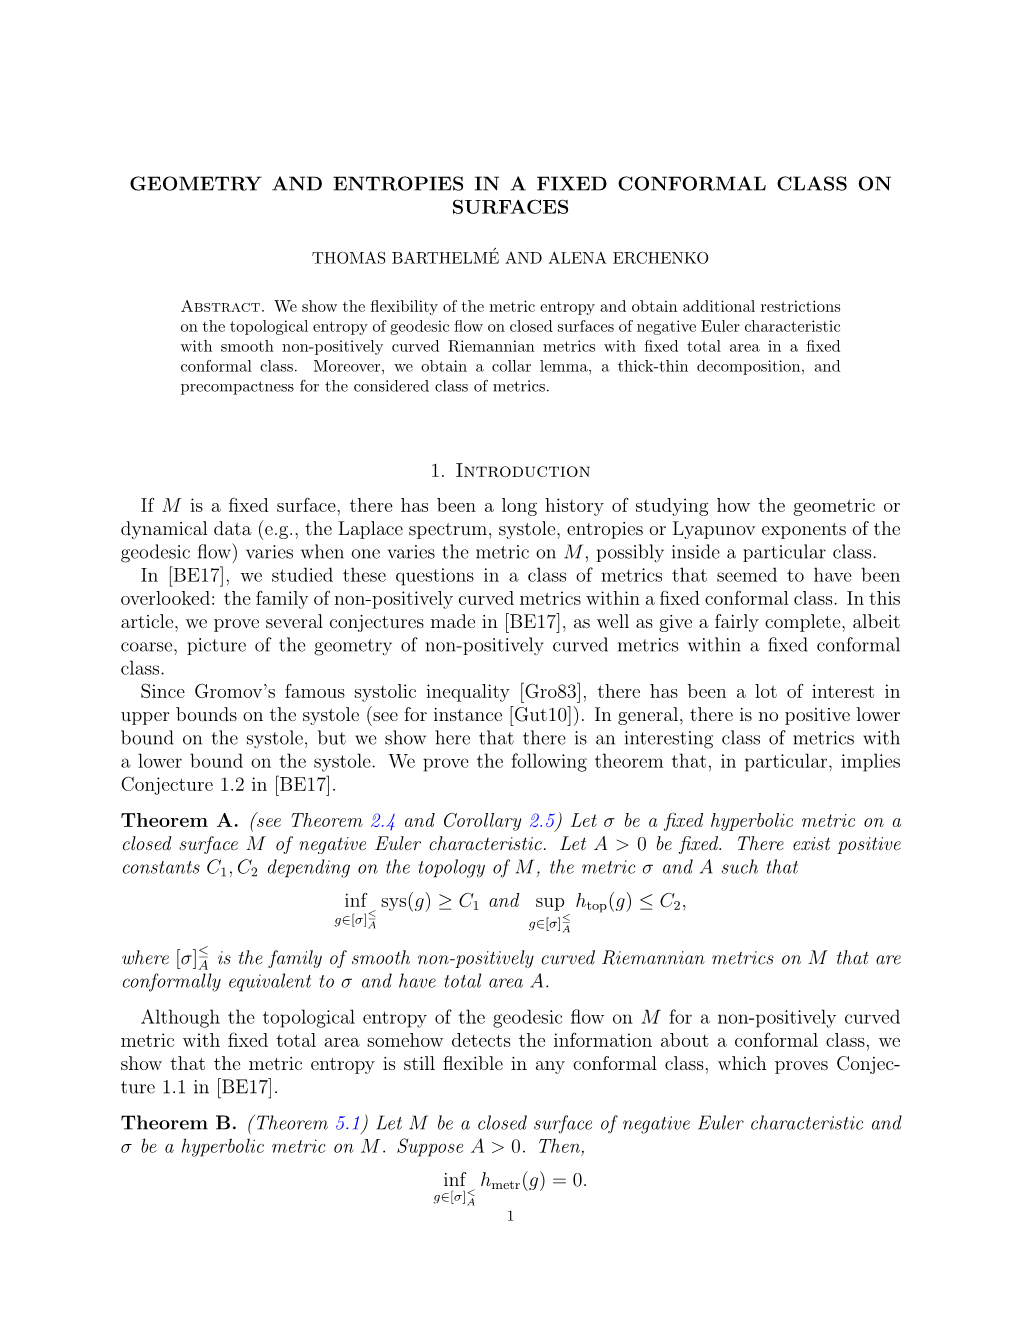 Geometry and Entropies in a Fixed Conformal Class on Surfaces